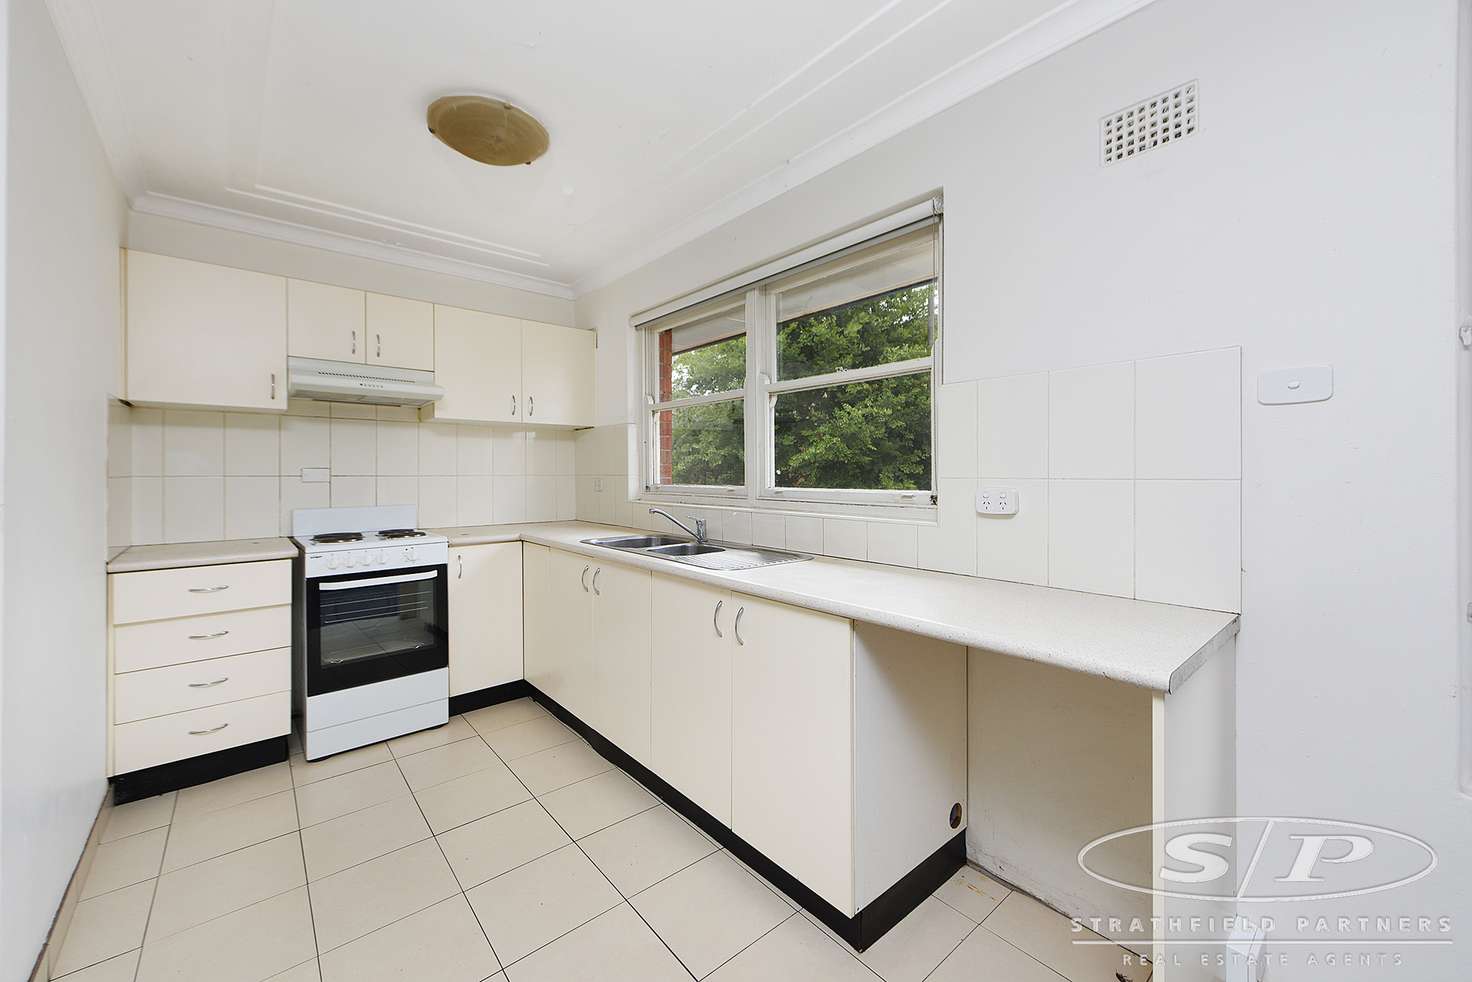 Main view of Homely unit listing, 5/28 Parnell Street, Strathfield NSW 2135